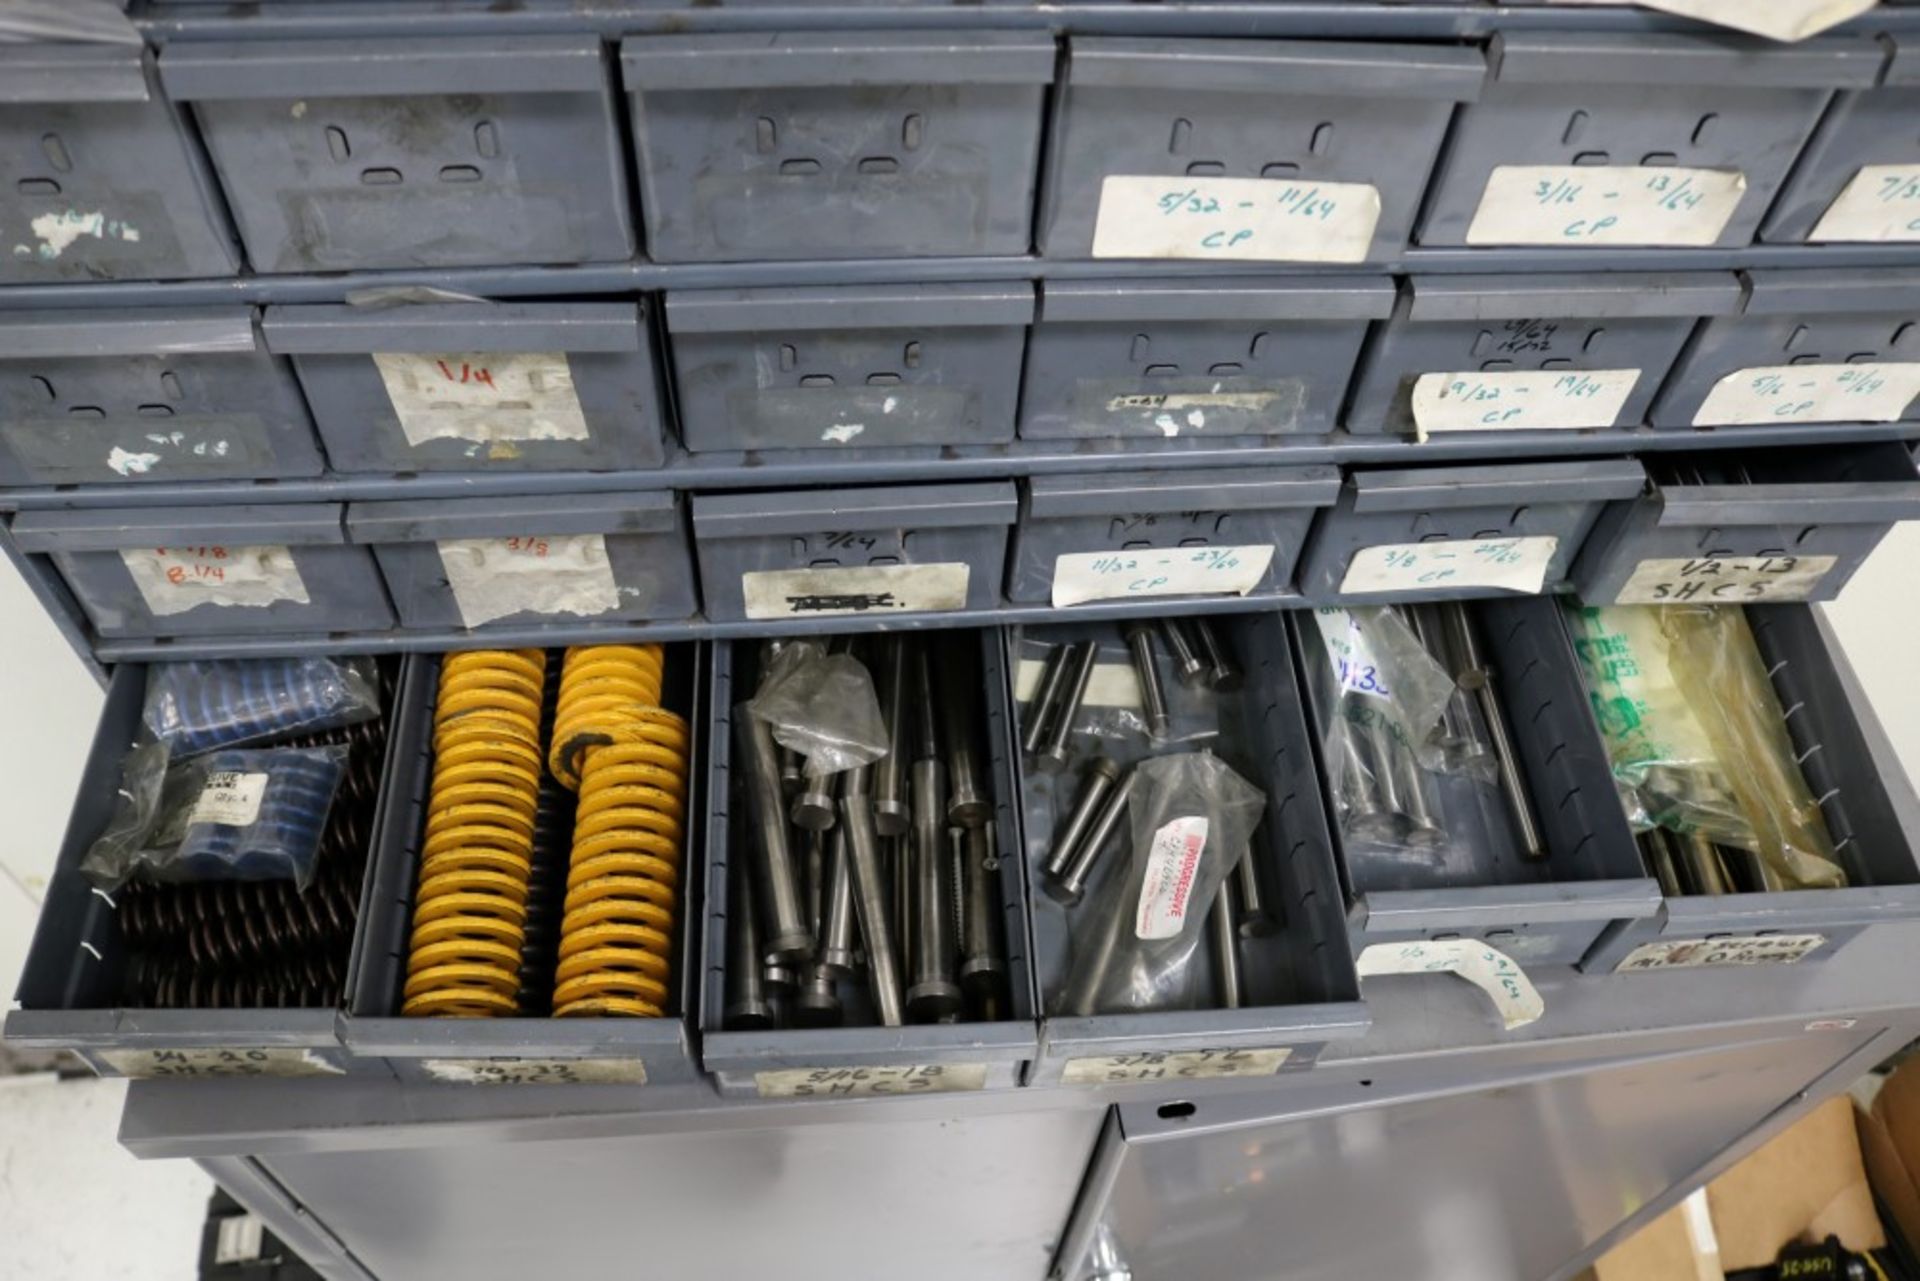 24 Bin Organizer Full of Various Sized Die Springs and Return Pins for Injection Molds - Image 8 of 9